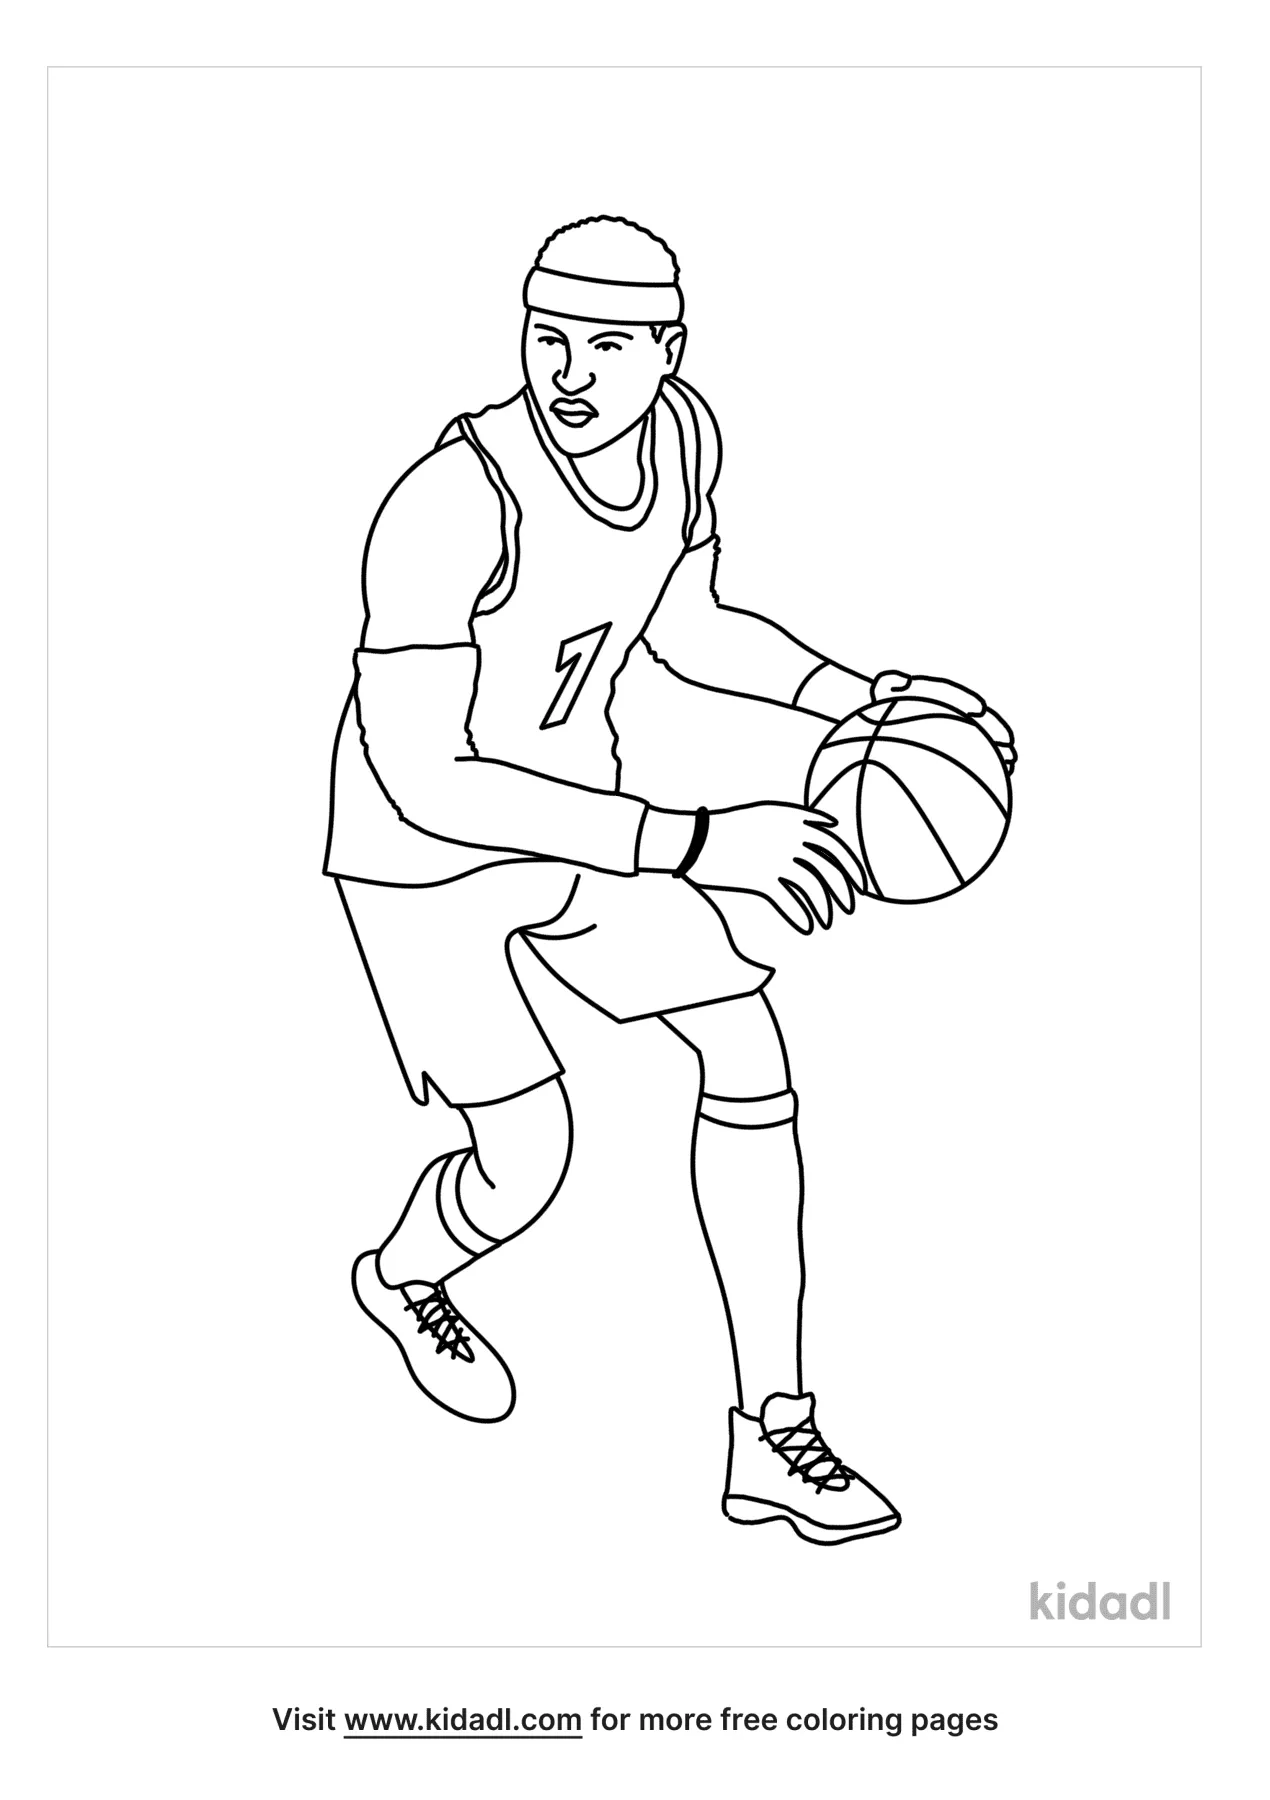 Free Carmelo Anthony Coloring Page | Coloring Page Printables | Kidadl